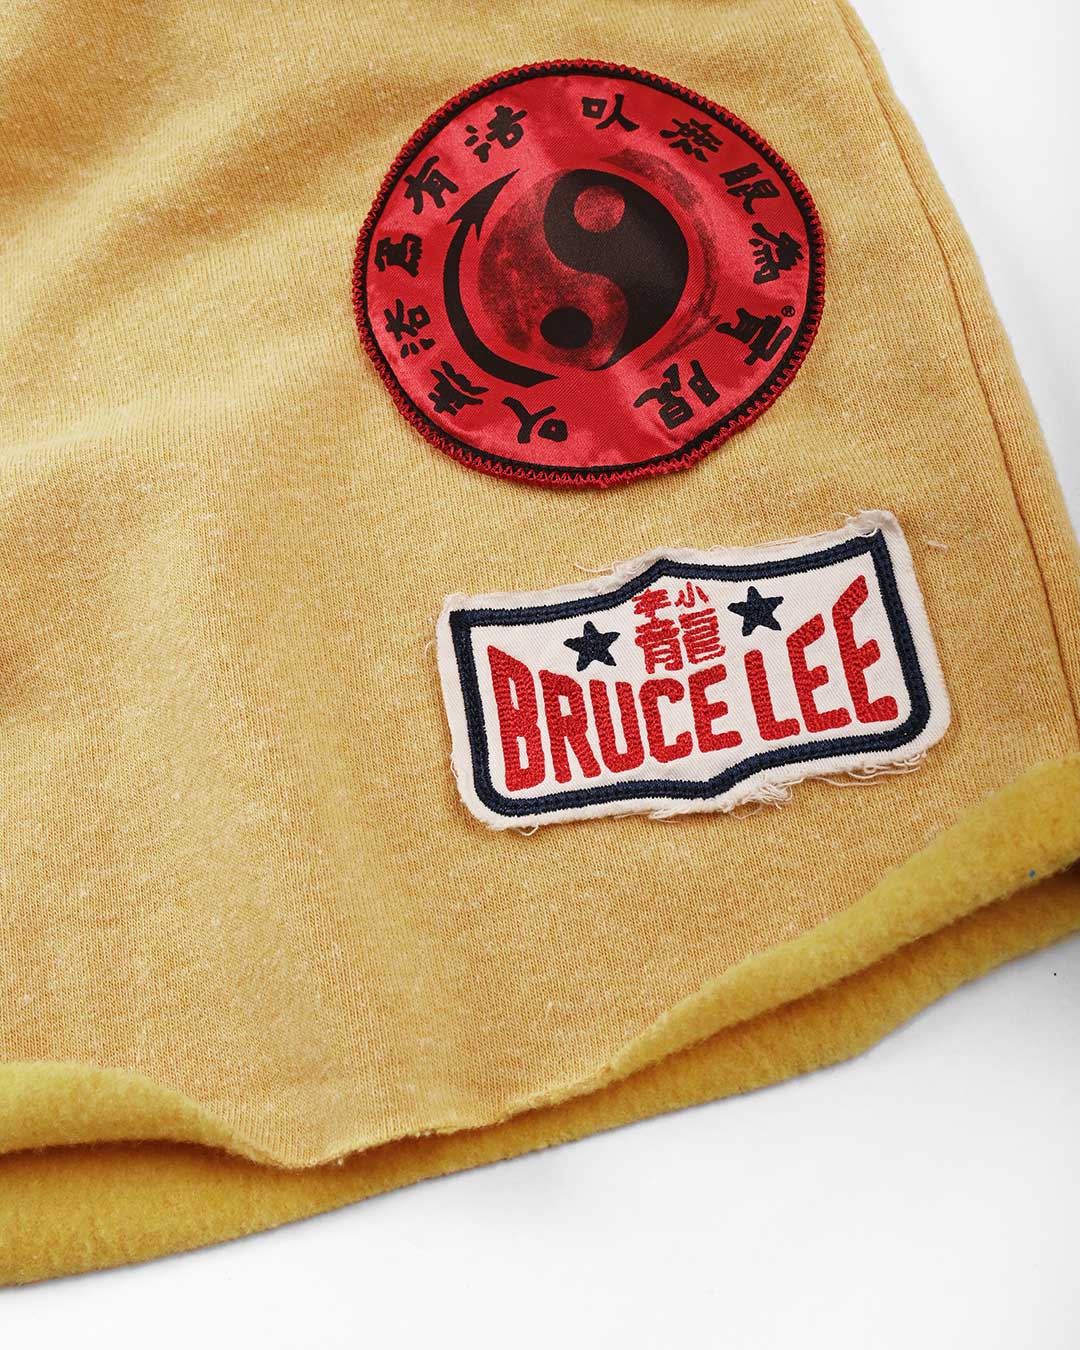 Bruce Lee JKD Gold Shorts - Roots of Fight